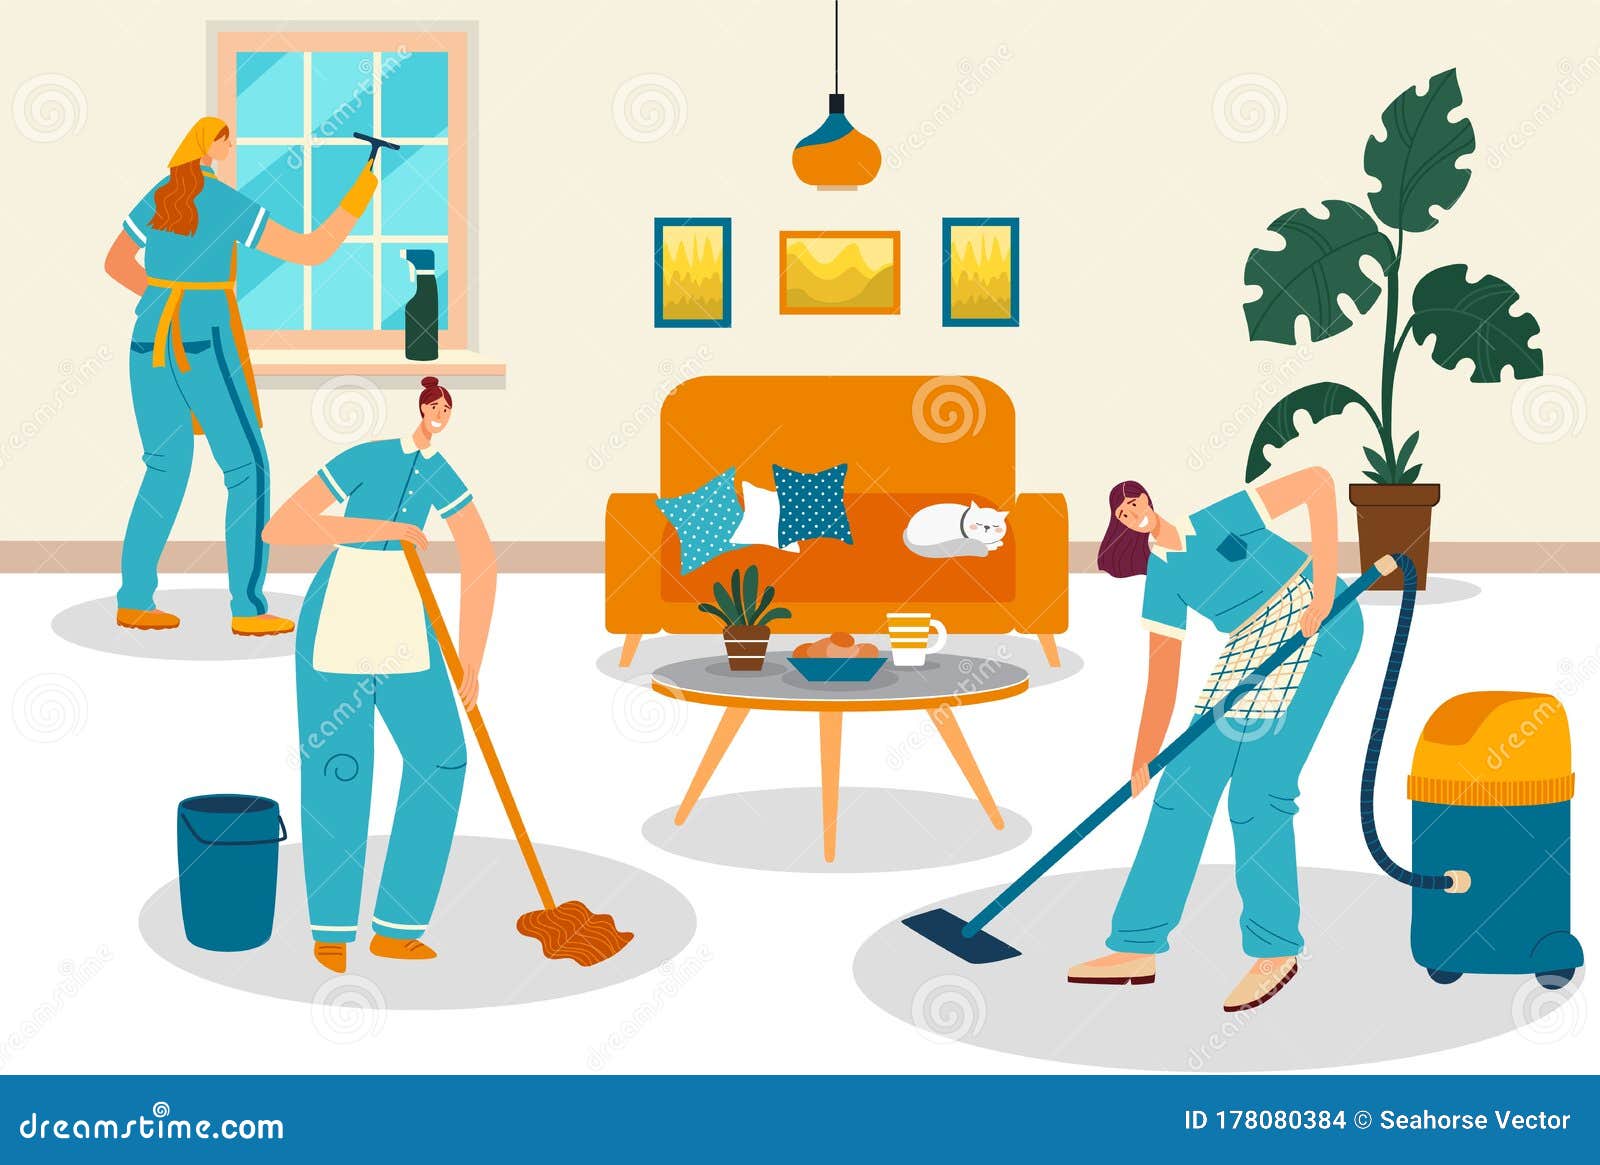 Cleaning Service People, Smiling Women Cartoon Characters Clean Apartment  Room, Vector Illustration Stock Vector - Illustration of floor, design:  178080384